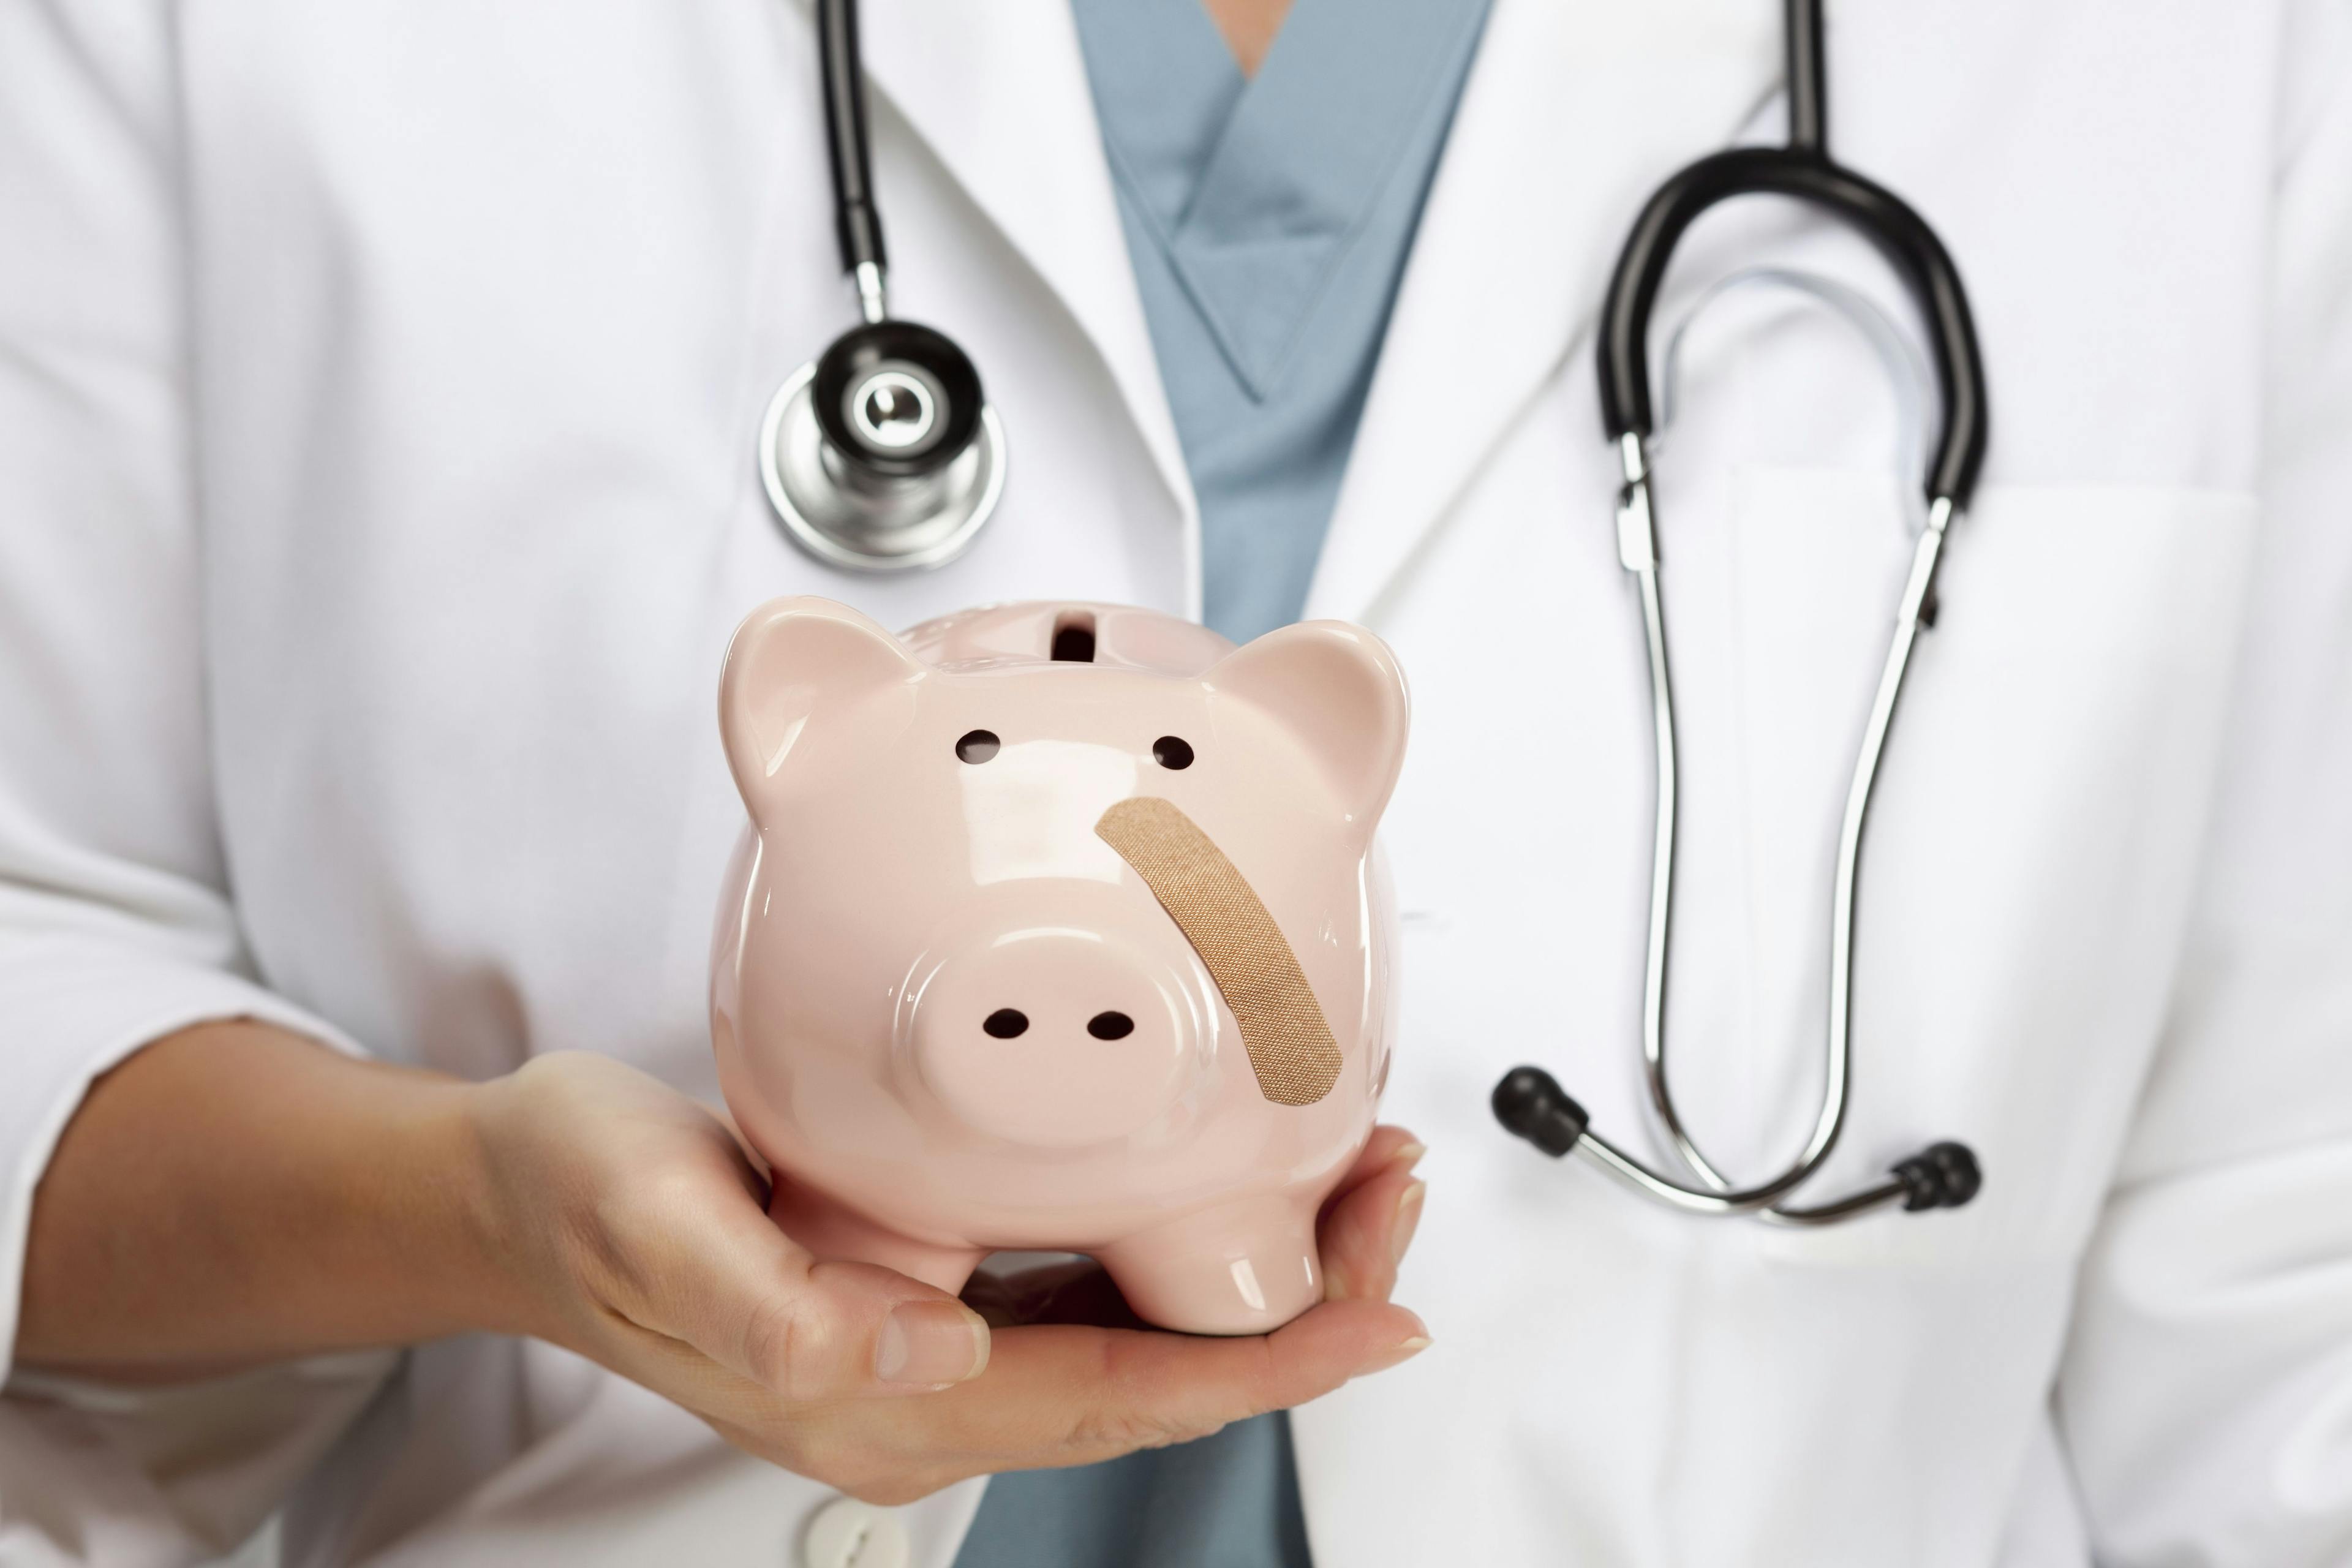 Primary care, specialist pay gap narrowed slightly under ACA: study